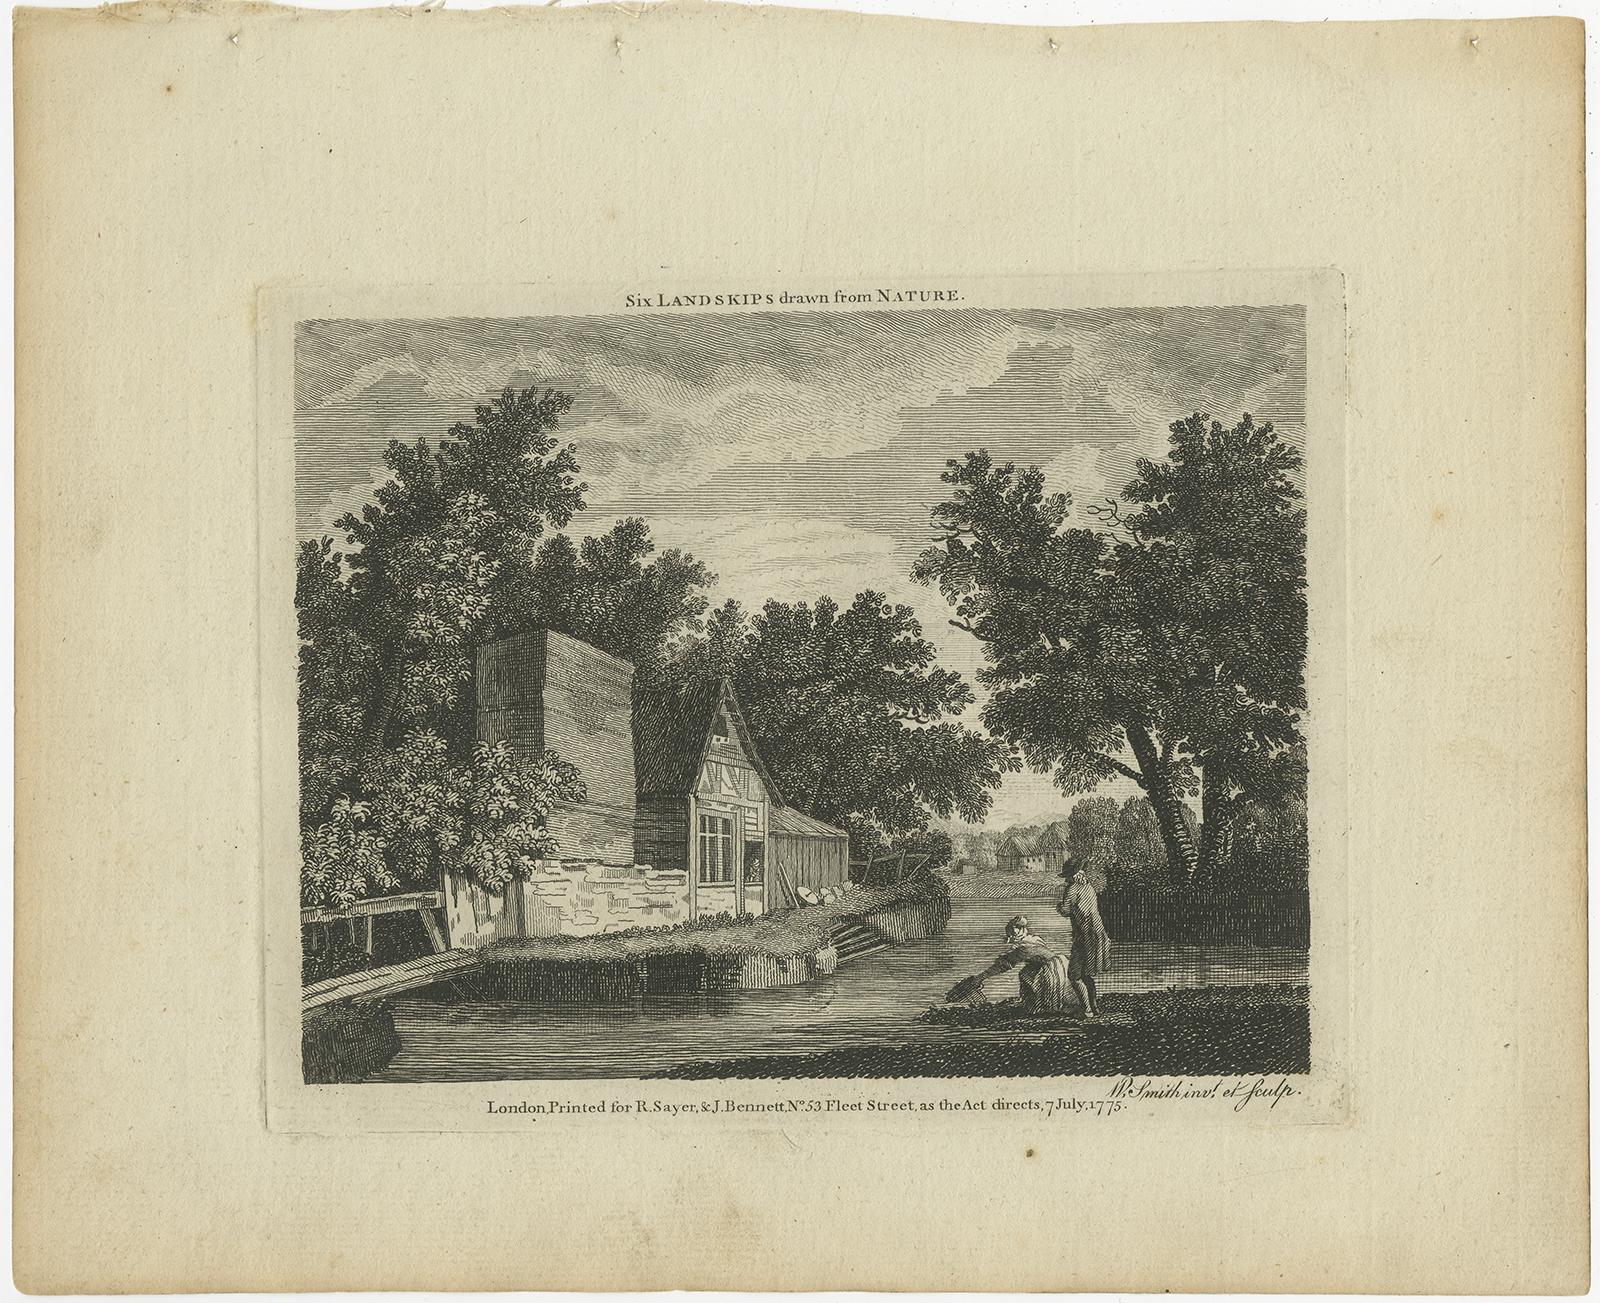 Set of two antique prints of landscapes and village scenes. Part of a series of six prints. Printed for R. Sayer & J. Bennett. Published in 1775.